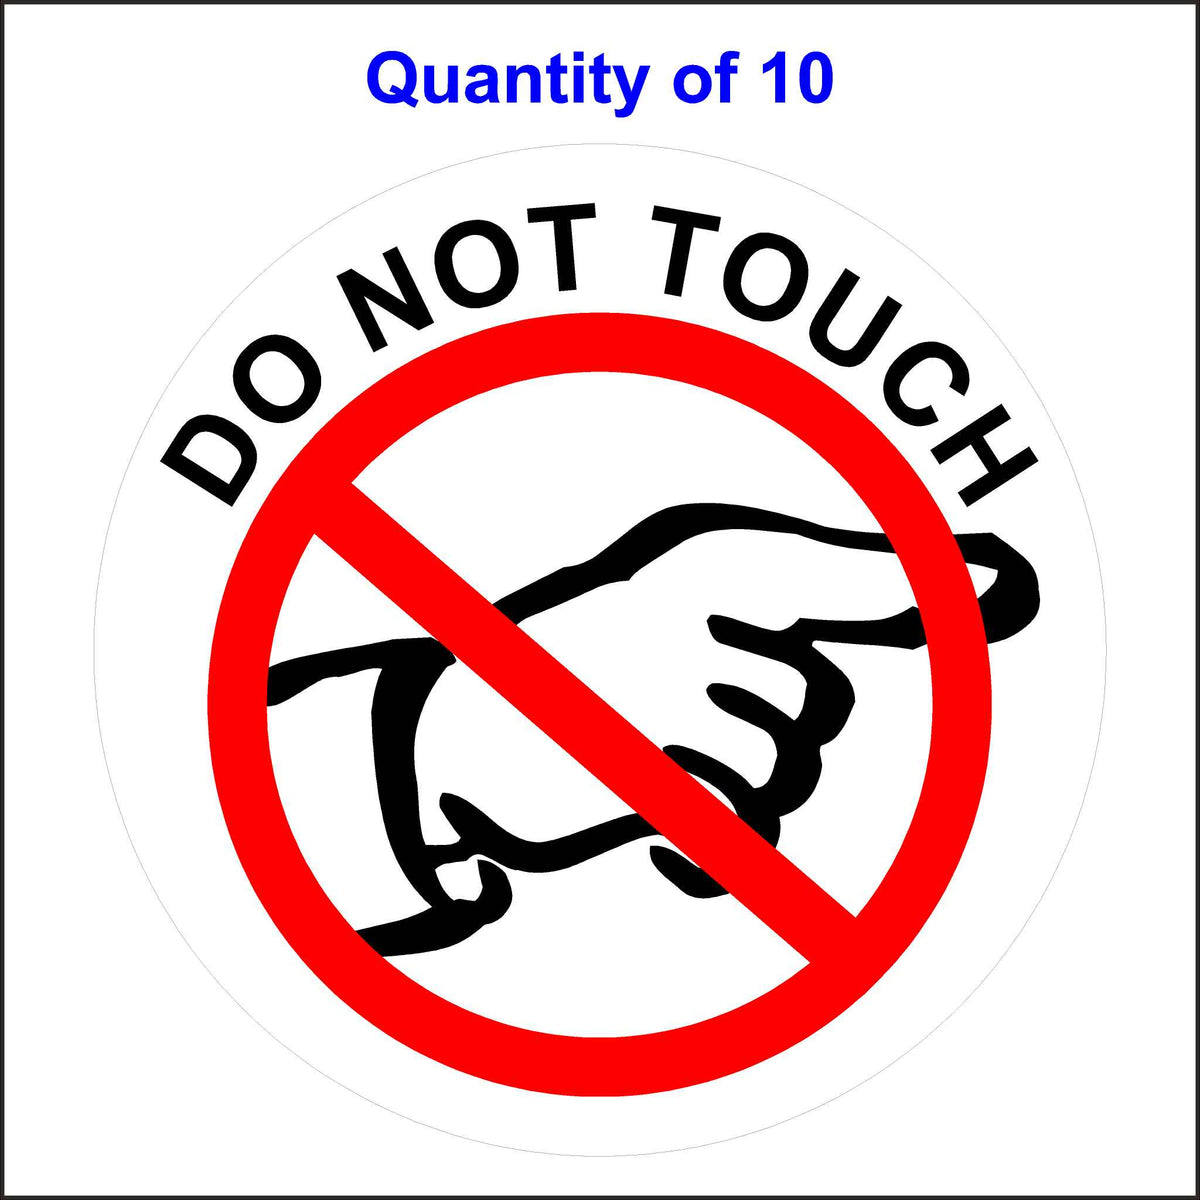 Do Not Touch Sticker With Finger Pointing. 10 Quantity.